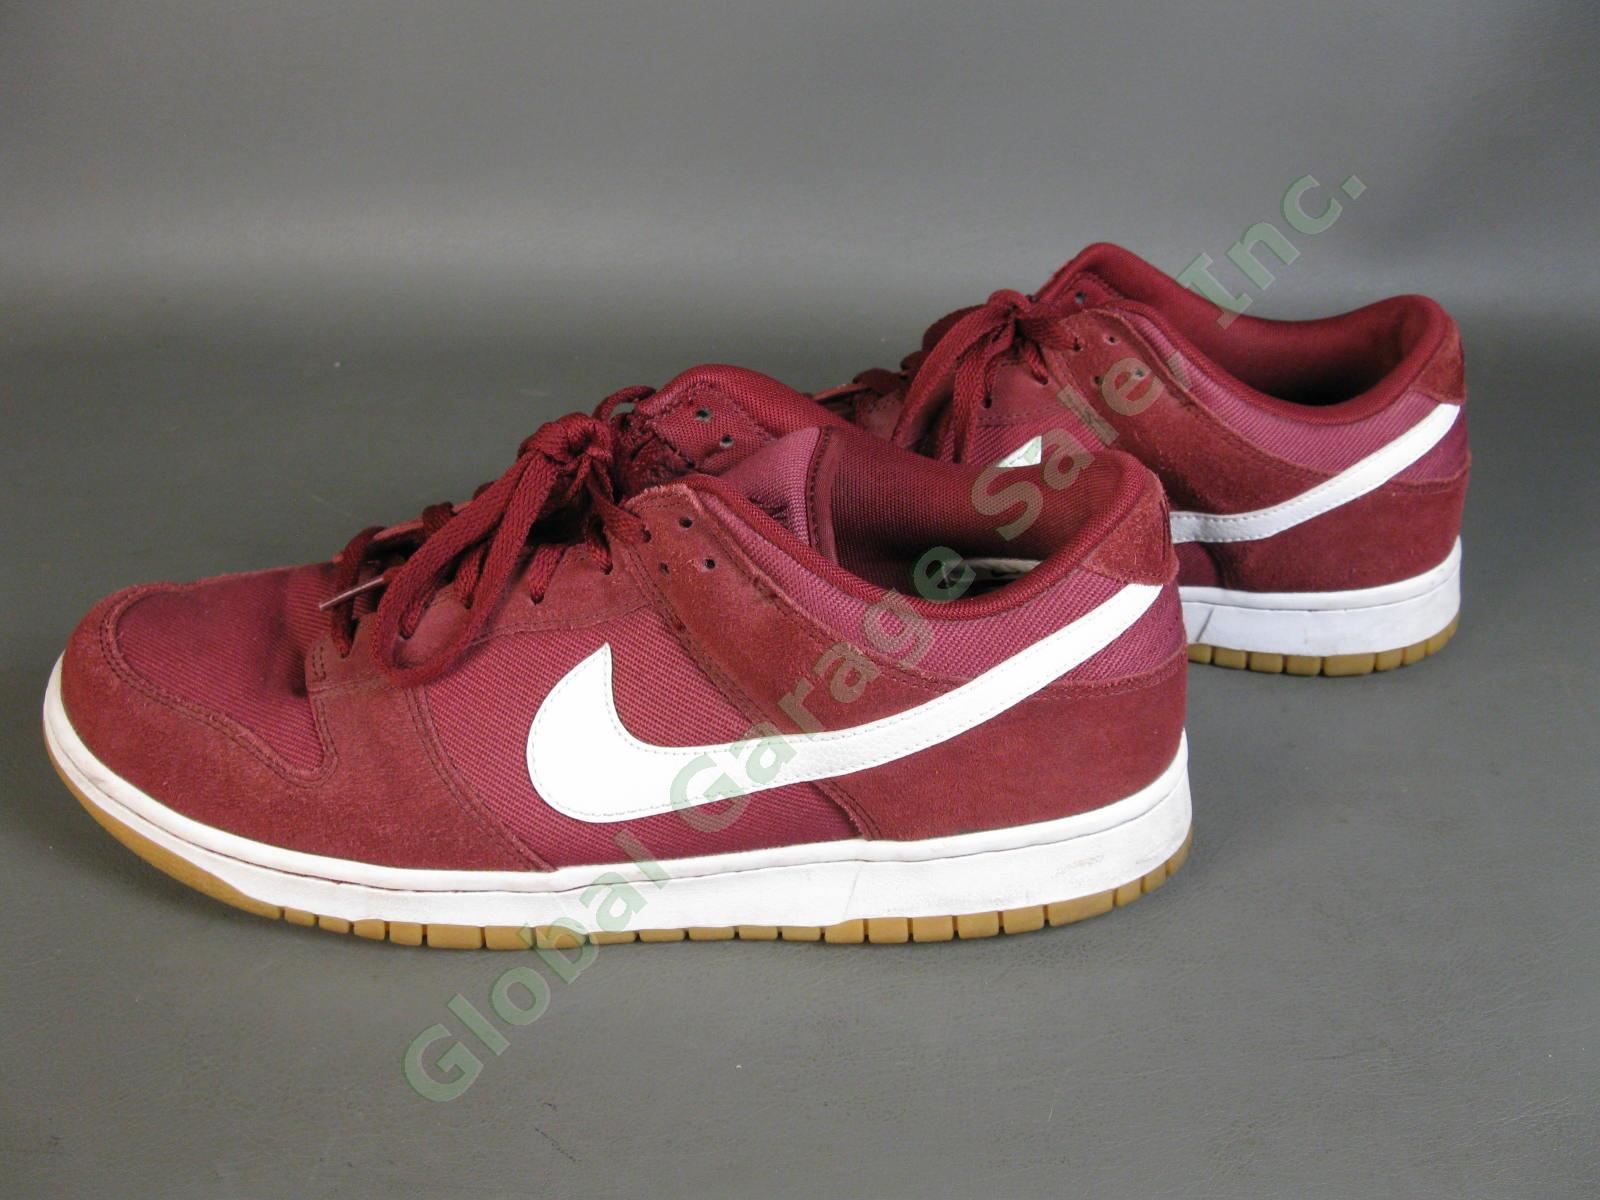 Nike Dunk Low Team Red White Sneaker Shoes AA1056-600 Canvas Burgundy Excellent